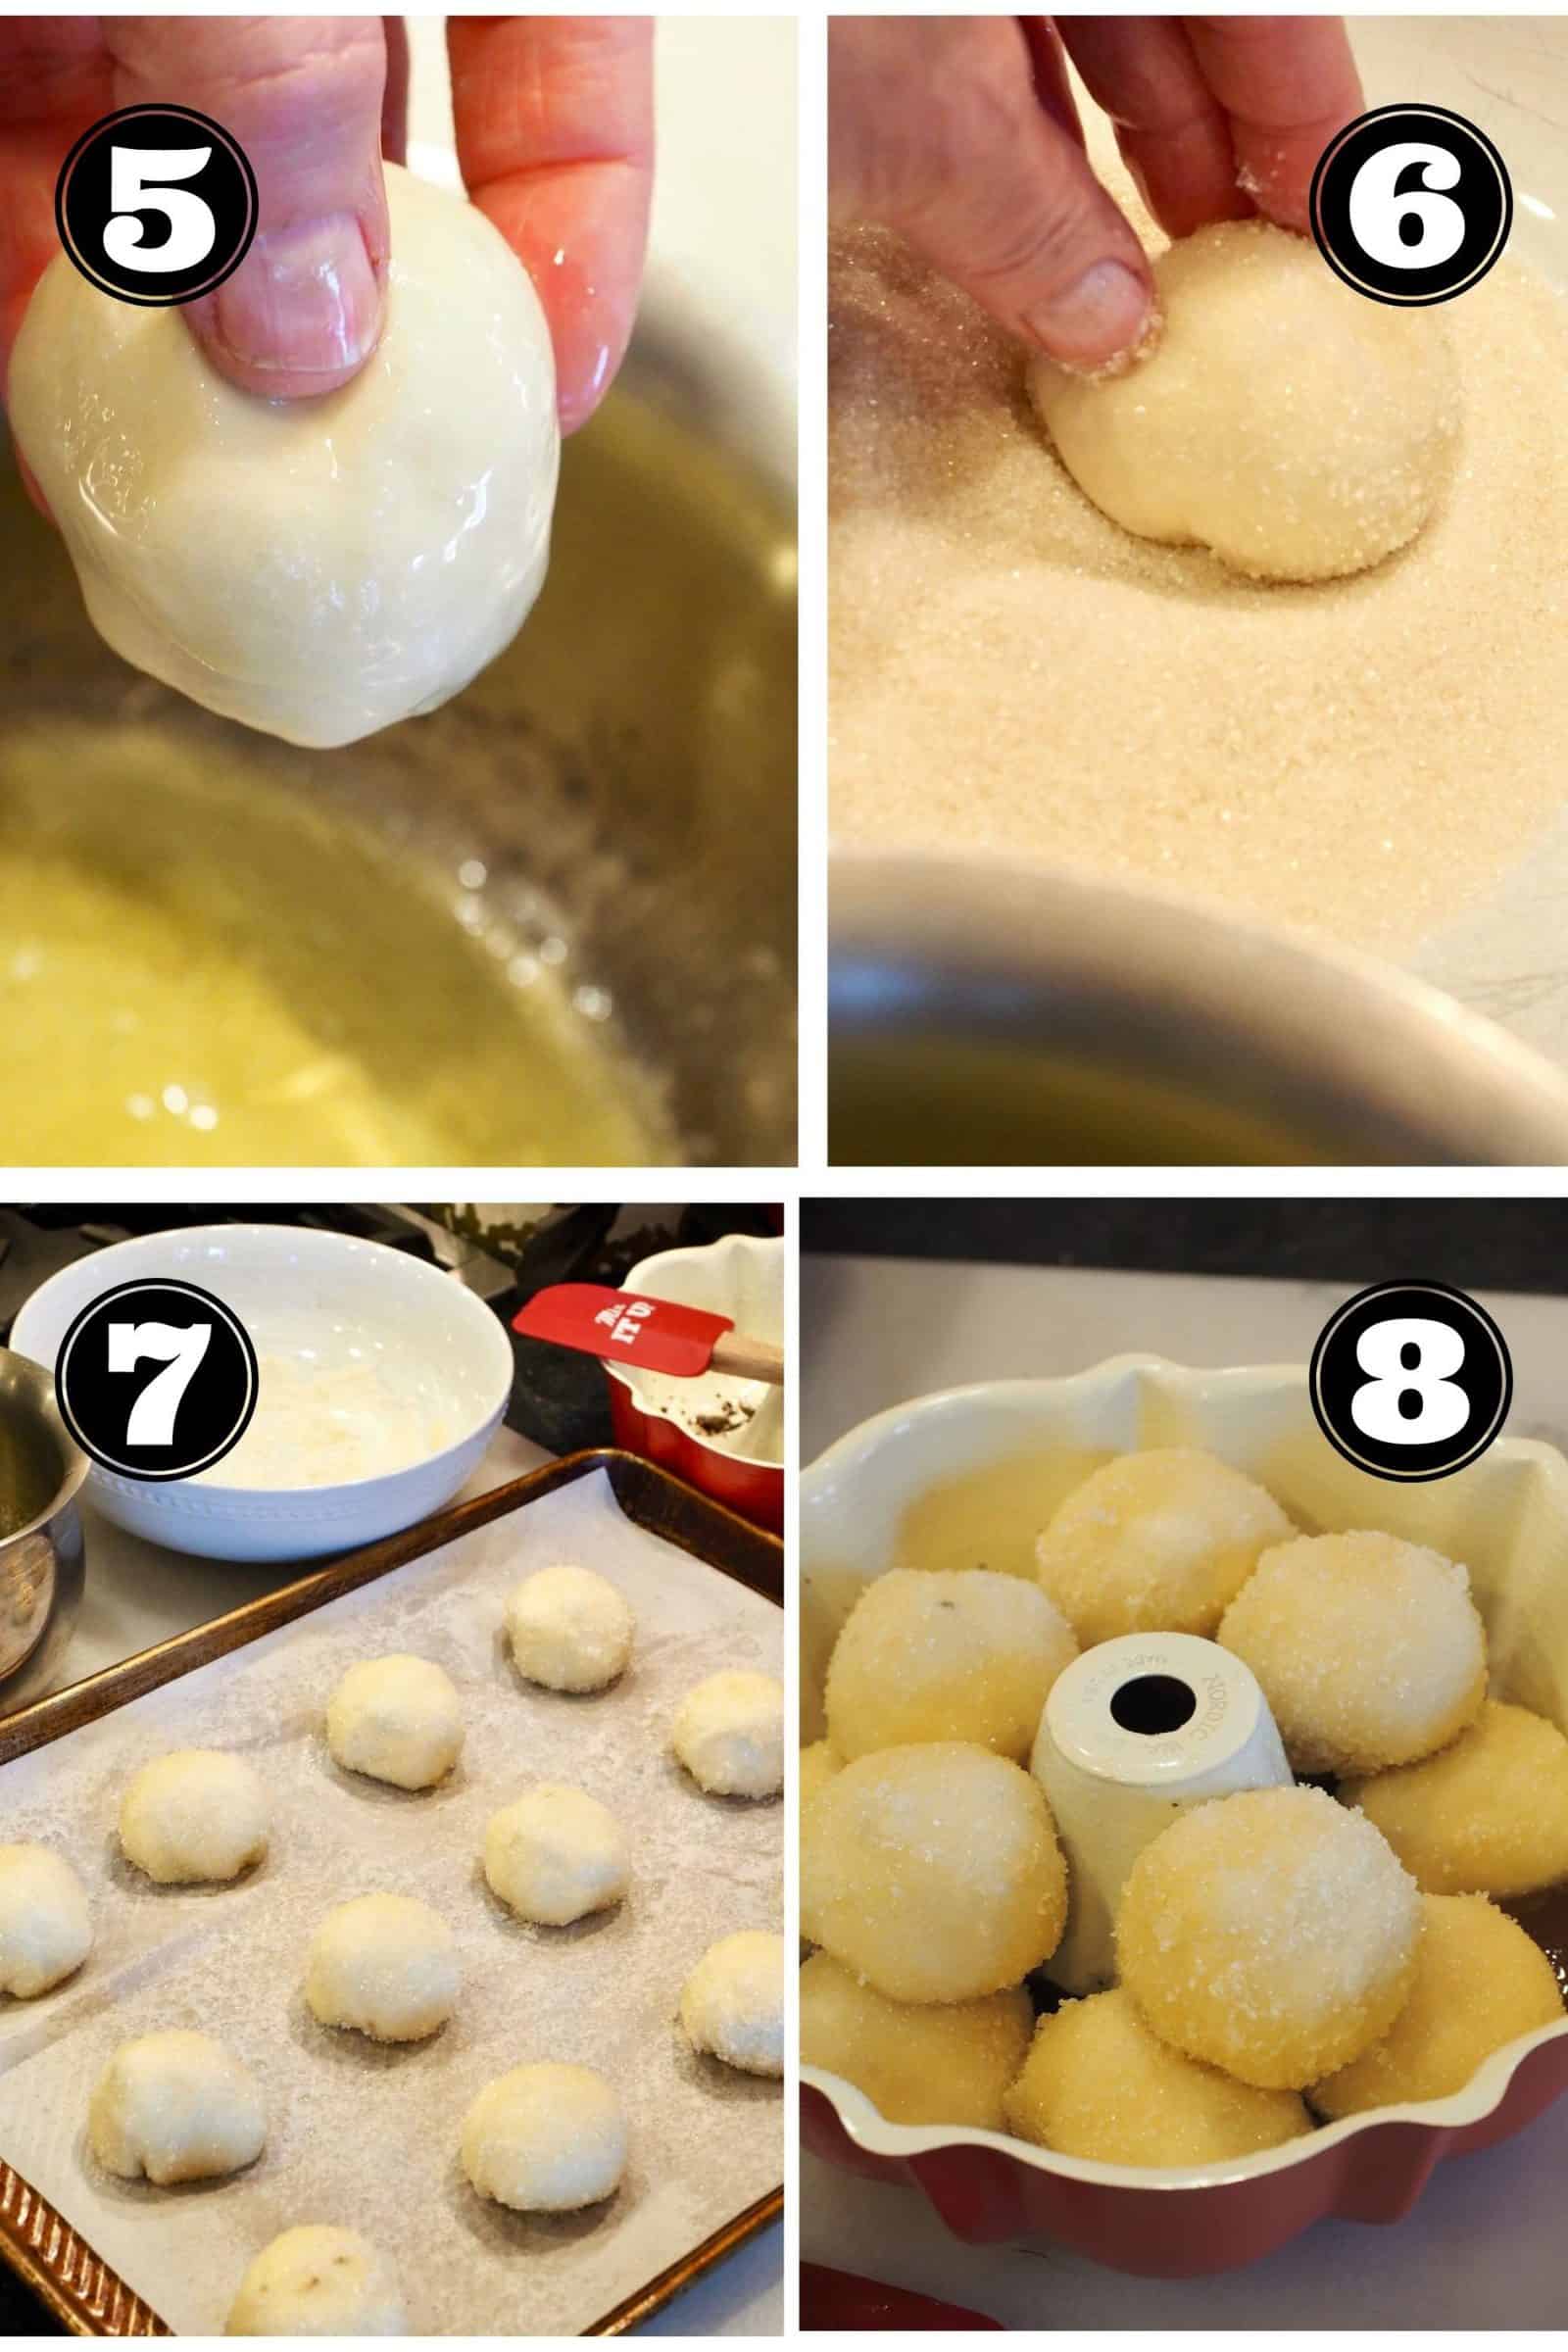 Process Shots for how to dip bread rolls and sugar in prep for Chocolate Monkey Bread Recipe.